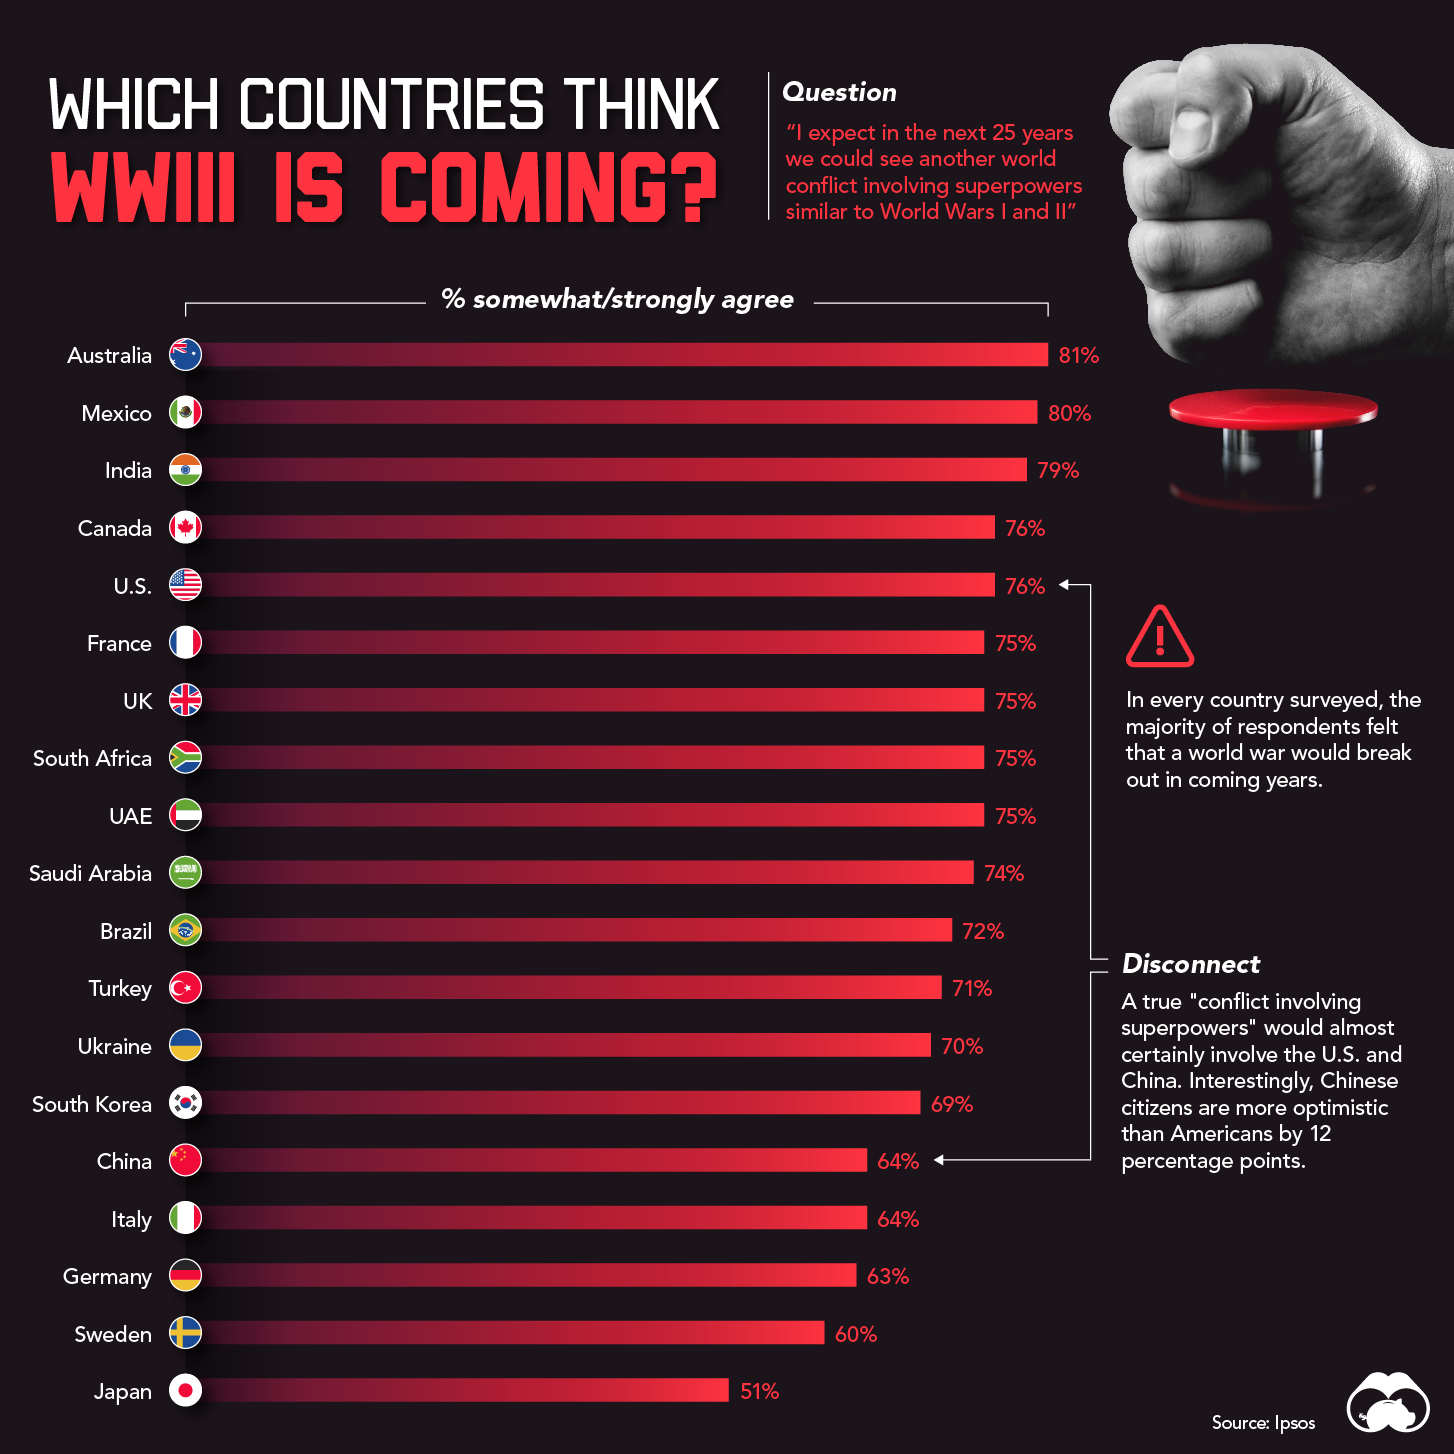 which countries believe WWIII is coming?